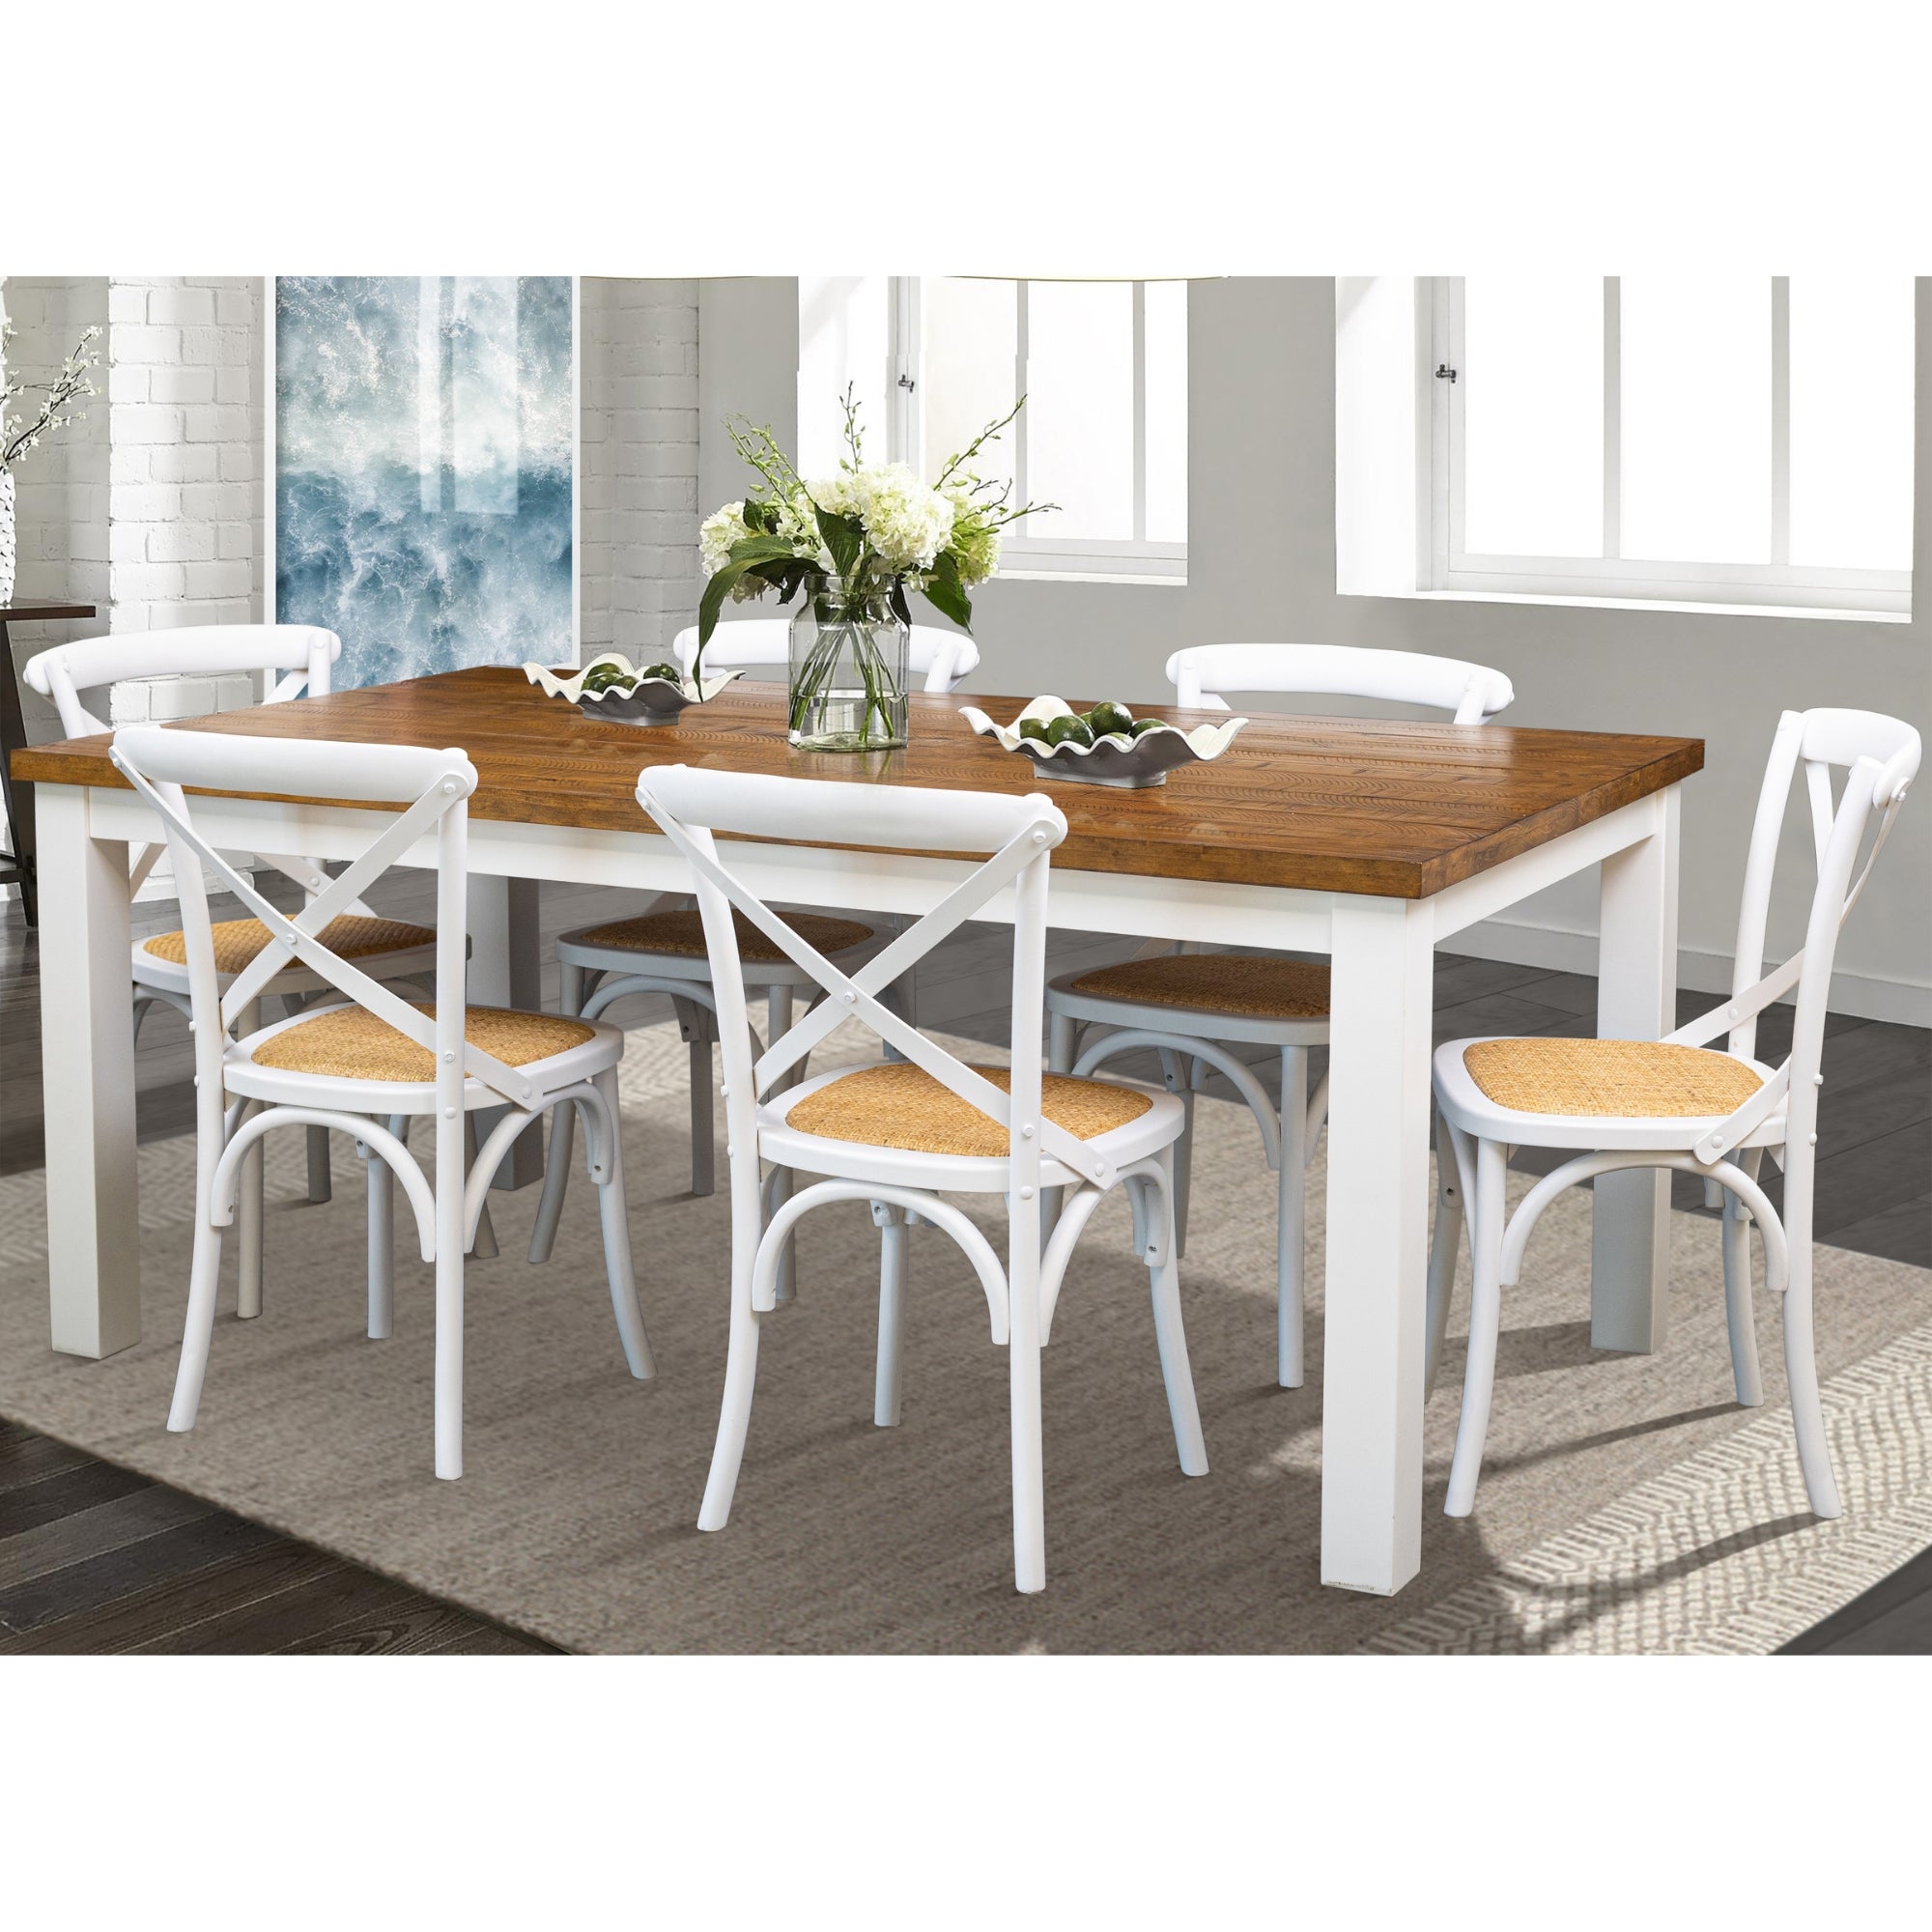 Eco-Friendly 7pc Dining Set, Solid Acacia Wood Table, Crossback Chairs